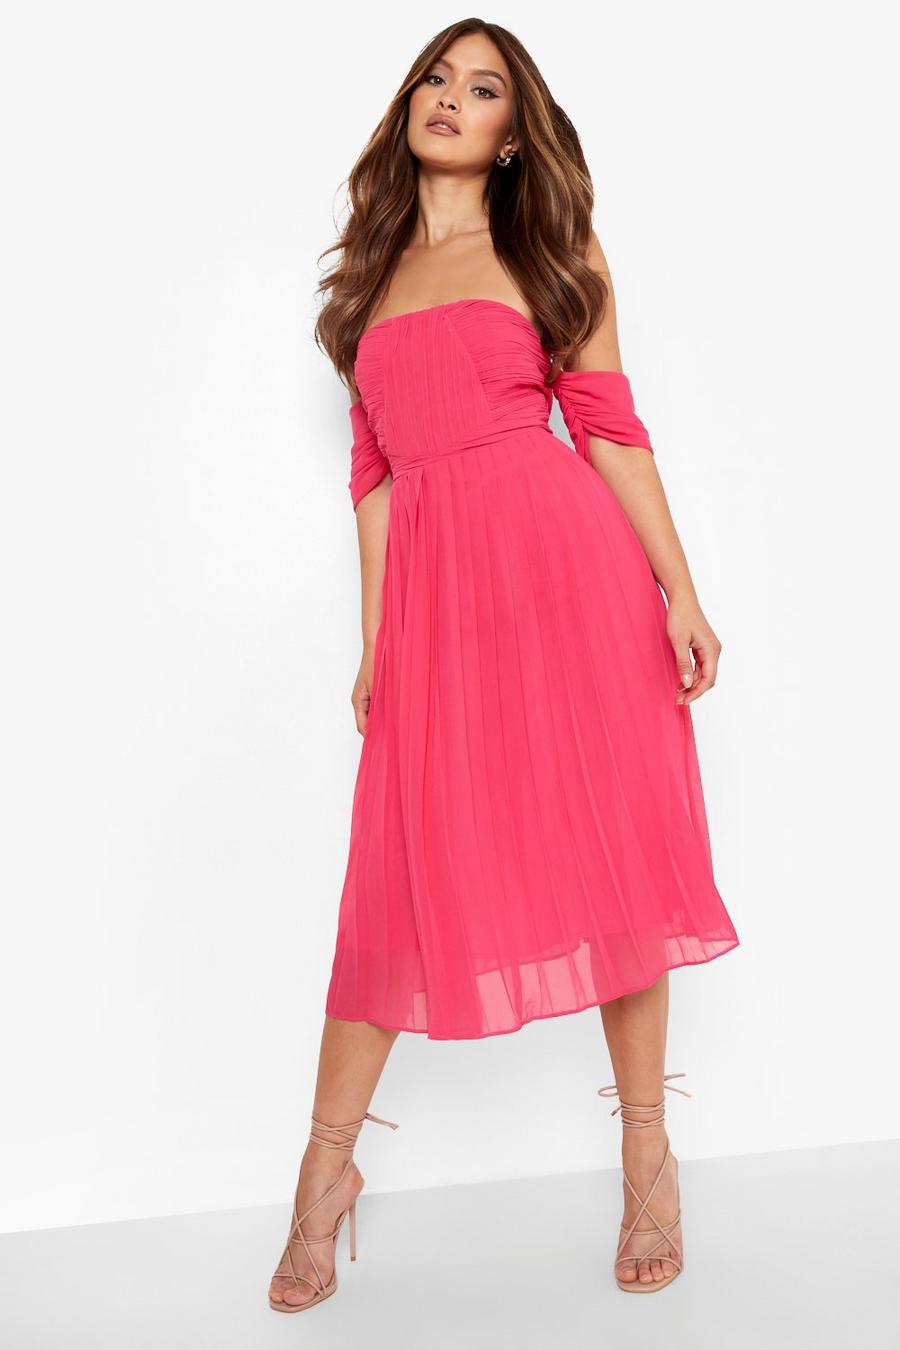 Hot pink Pleated Off The Shoulder Bridesmaid Midi Dress